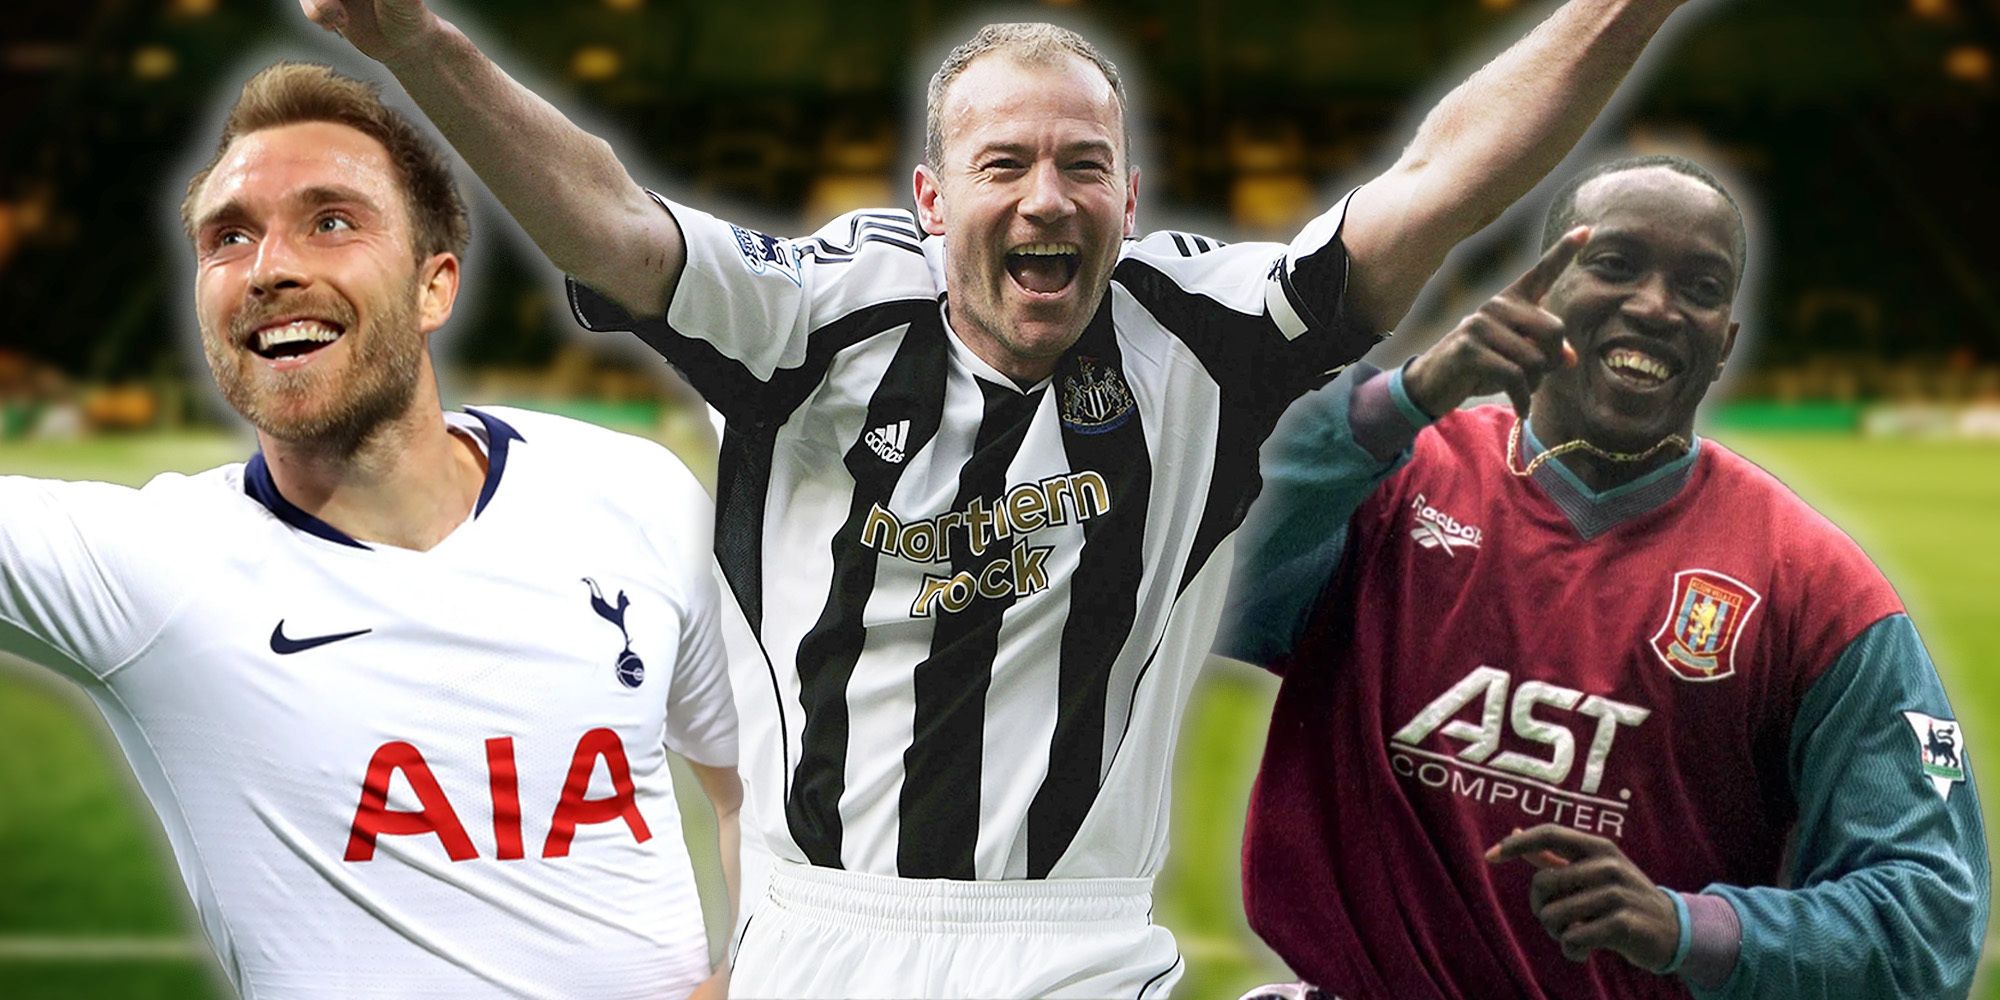 Alan Shearer, Dwight Yorke and Christian Eriksen are among the fastest goalscorers in Premier League history